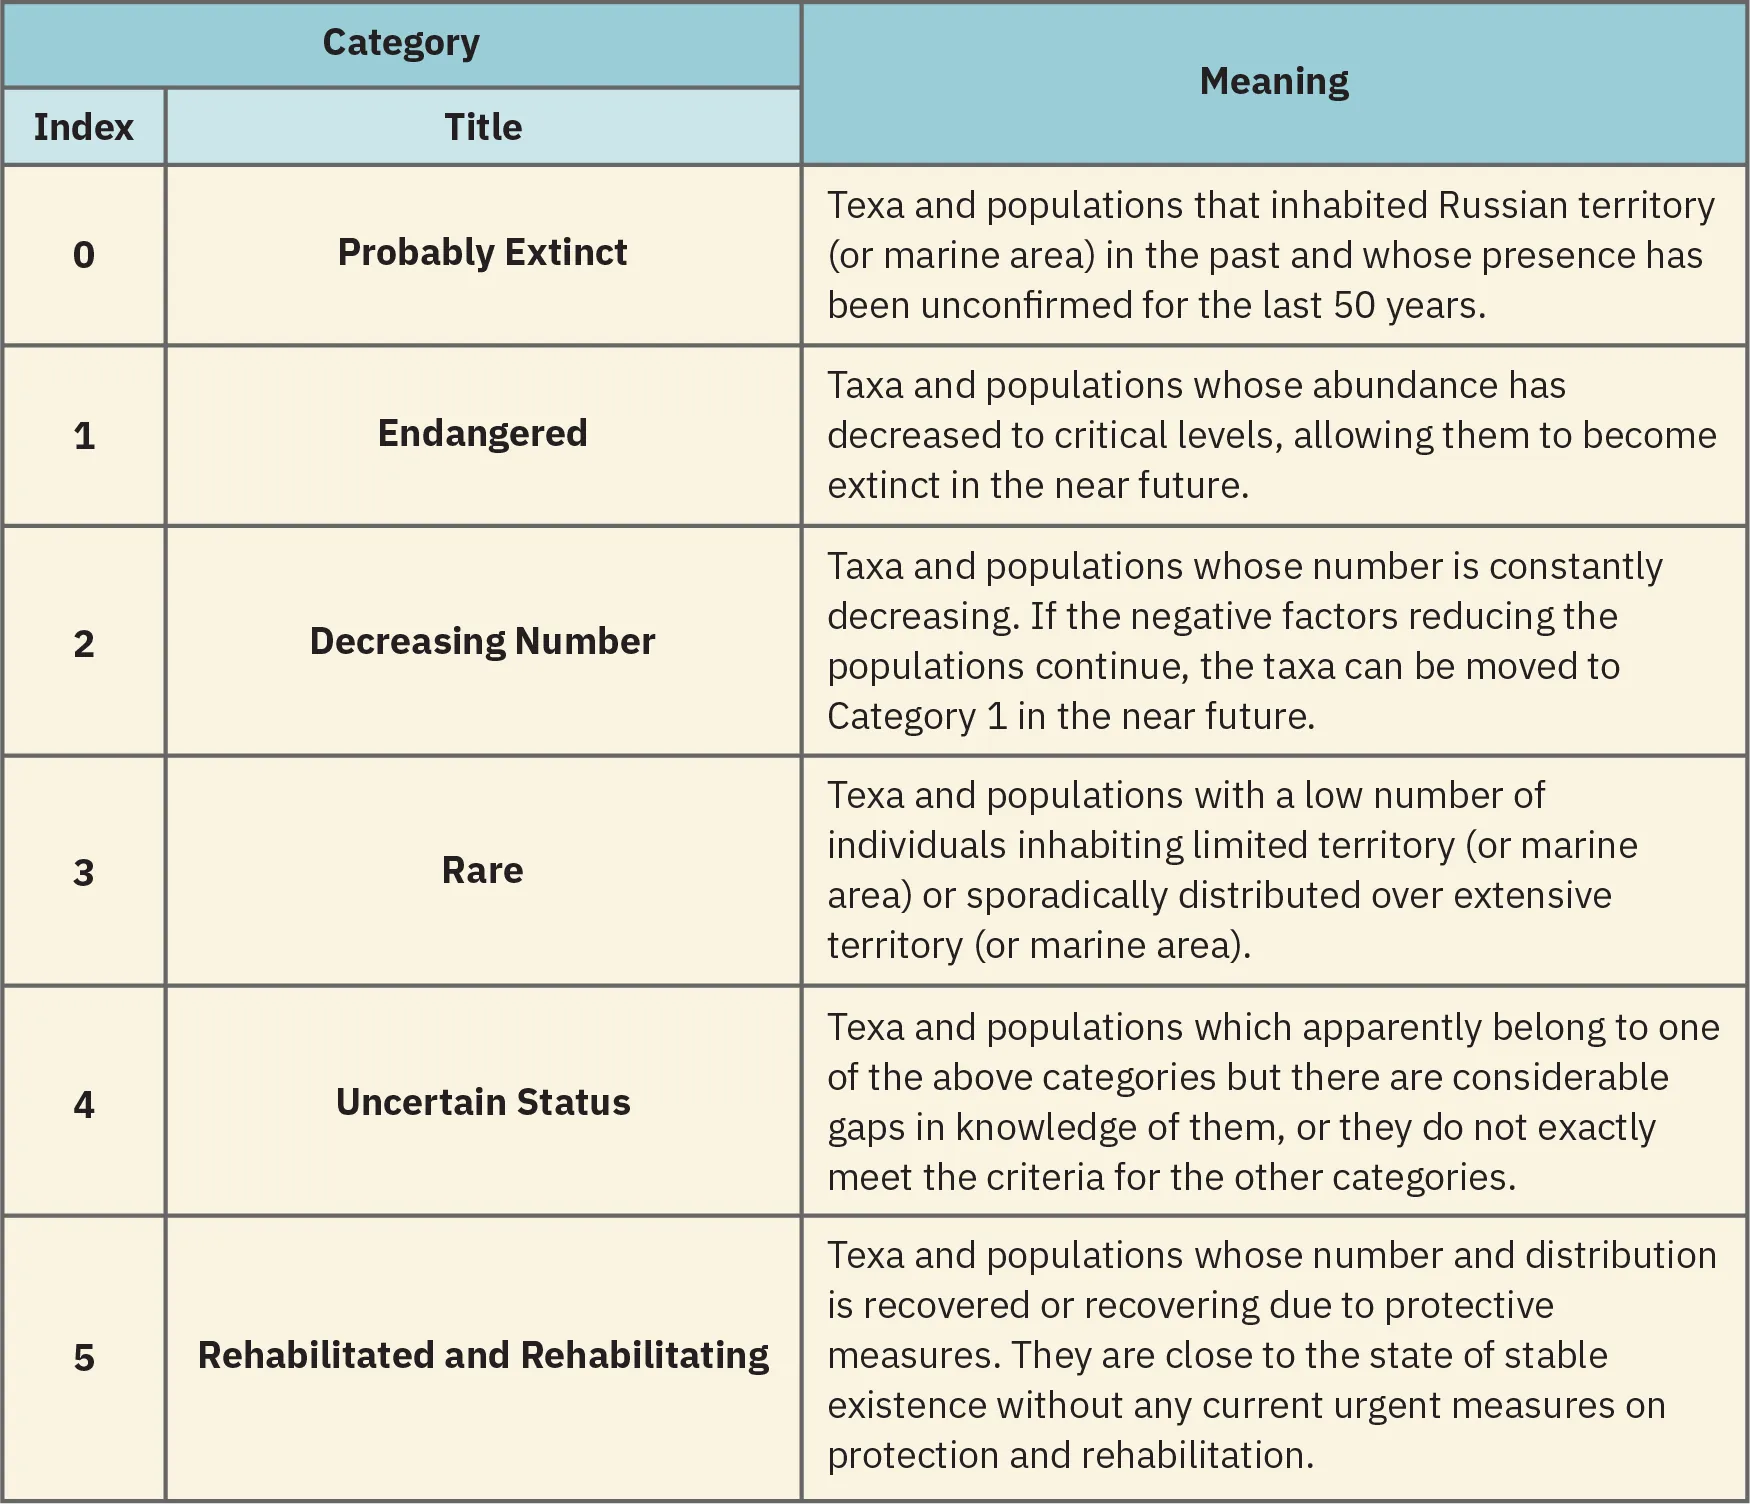 A table contains explanations of titles such as Probably Extinct, Endangered, Decreasing Number, Rare, Uncertain Status, and Rehabilitated and Rehabilitating. A table is one type of visual that might be included in a case study.